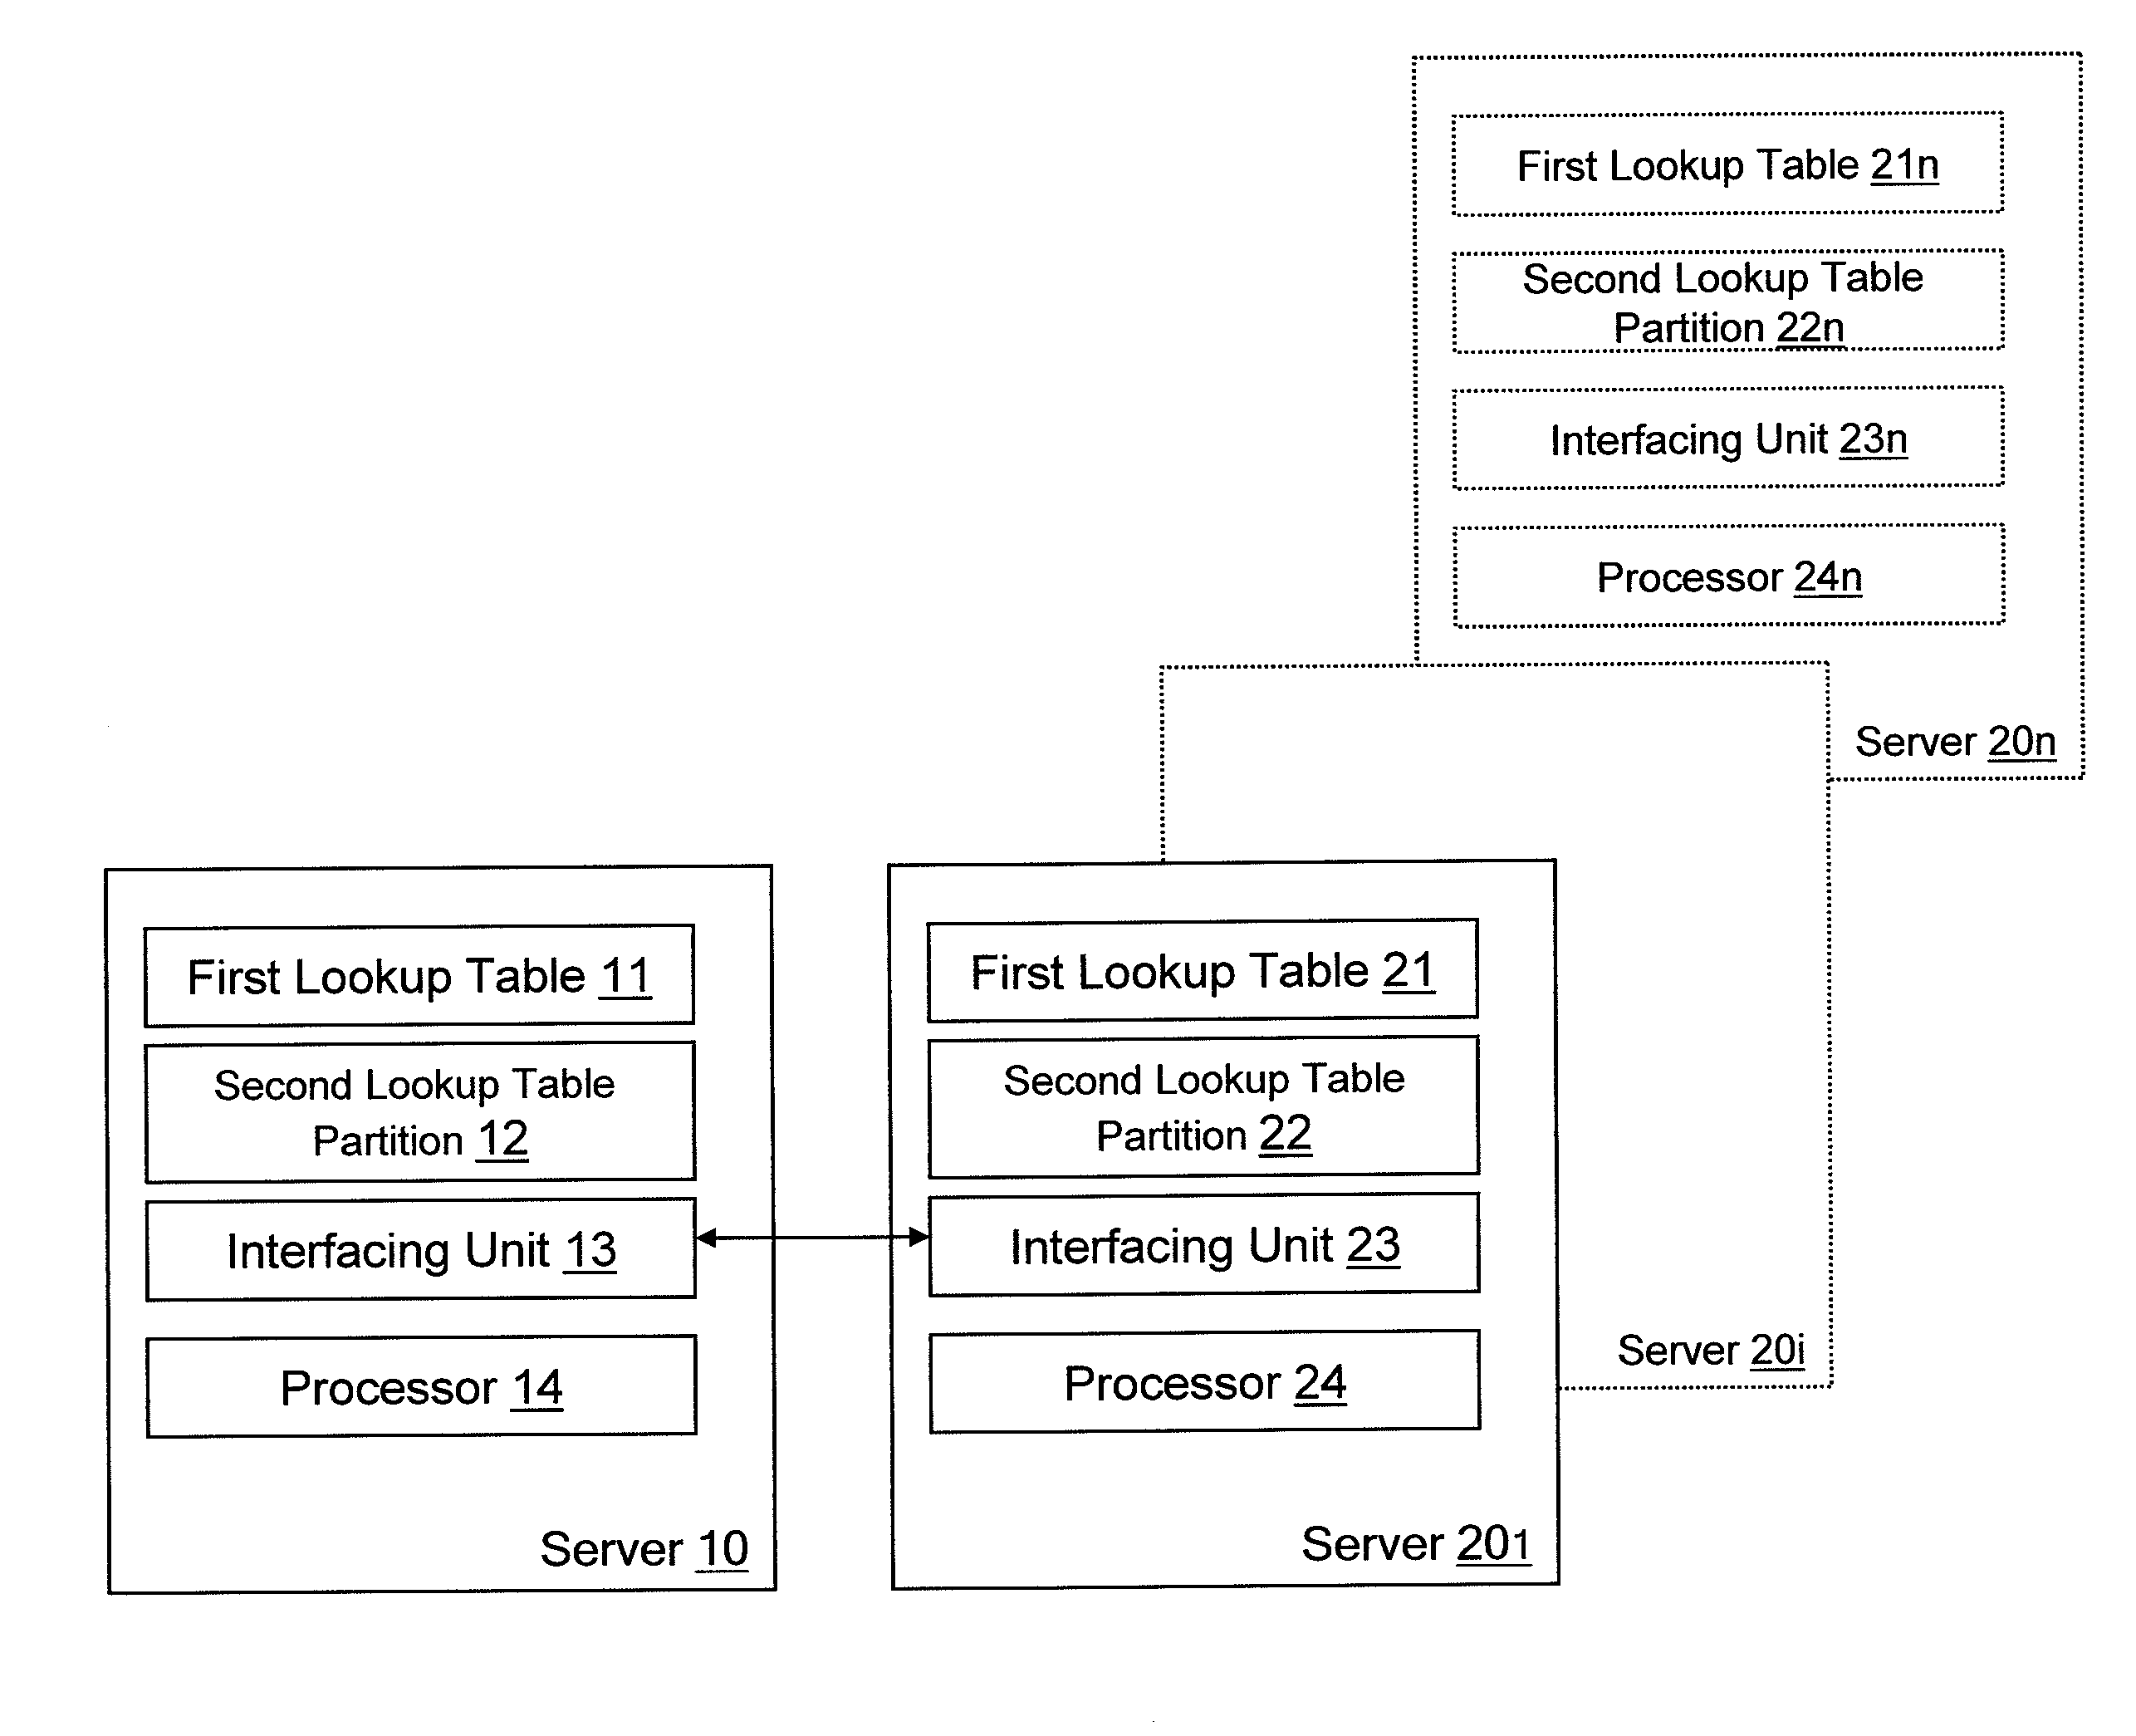 Distributed database system using master server to generate lookup tables for load distribution